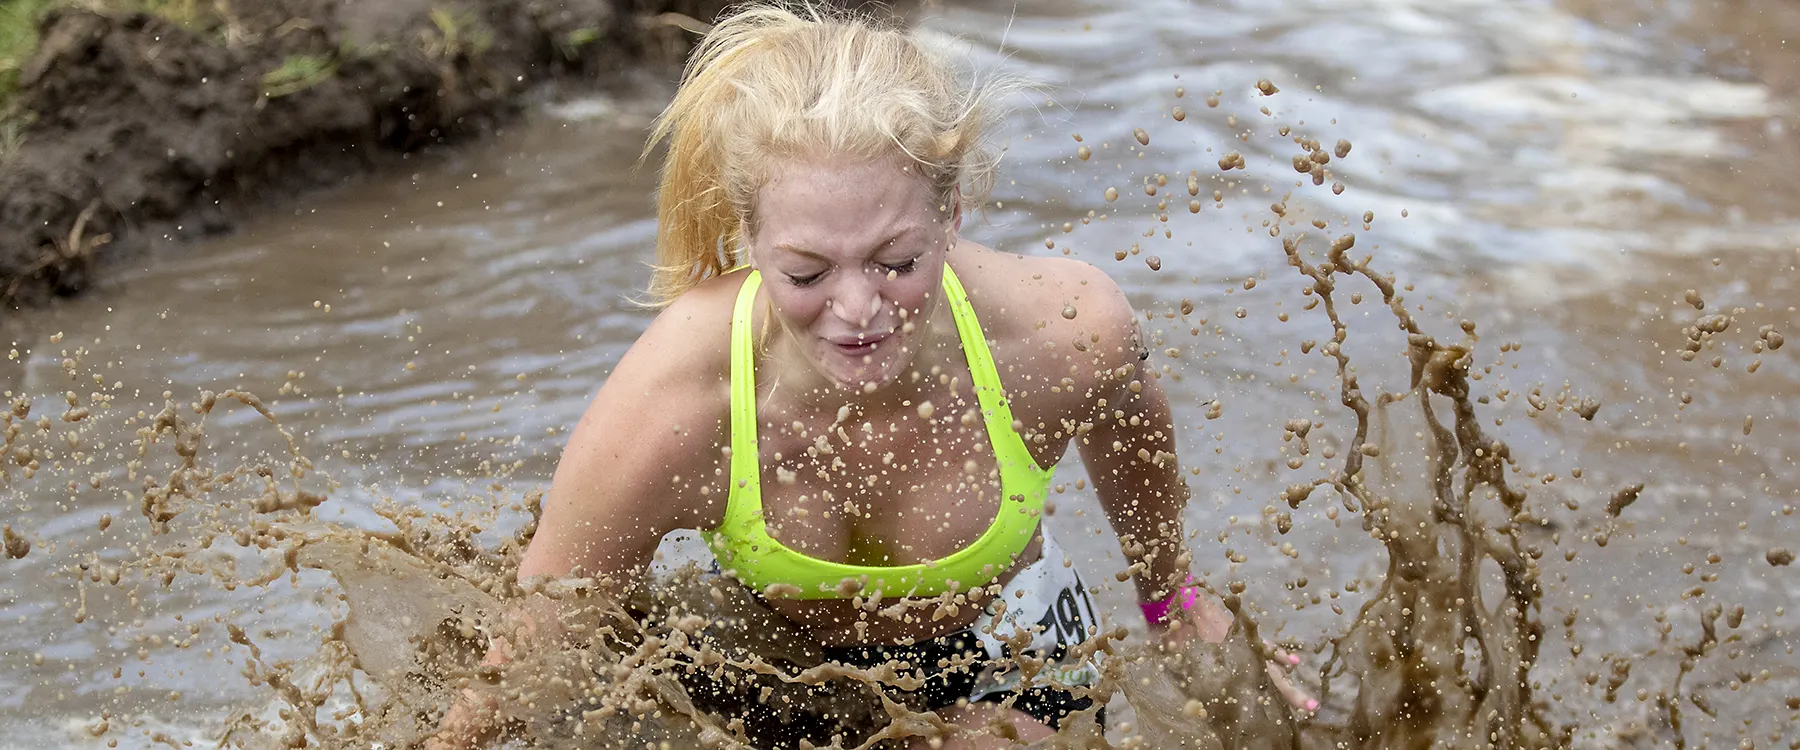 Woman Splashing in Mud Obstacle